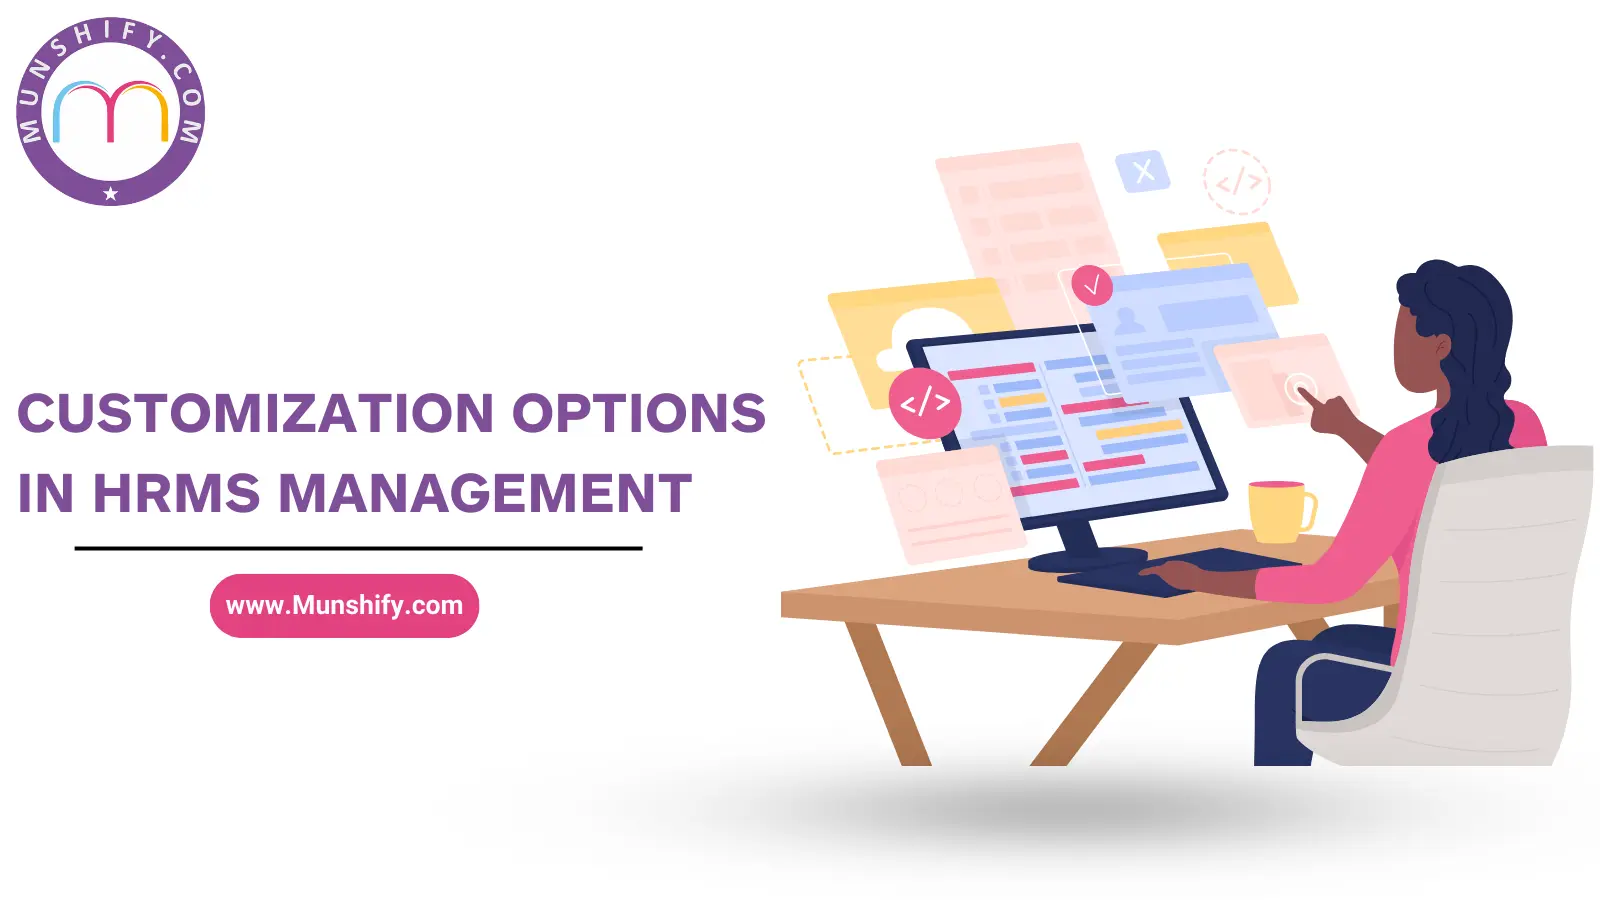 Customization Options in HRMS Management